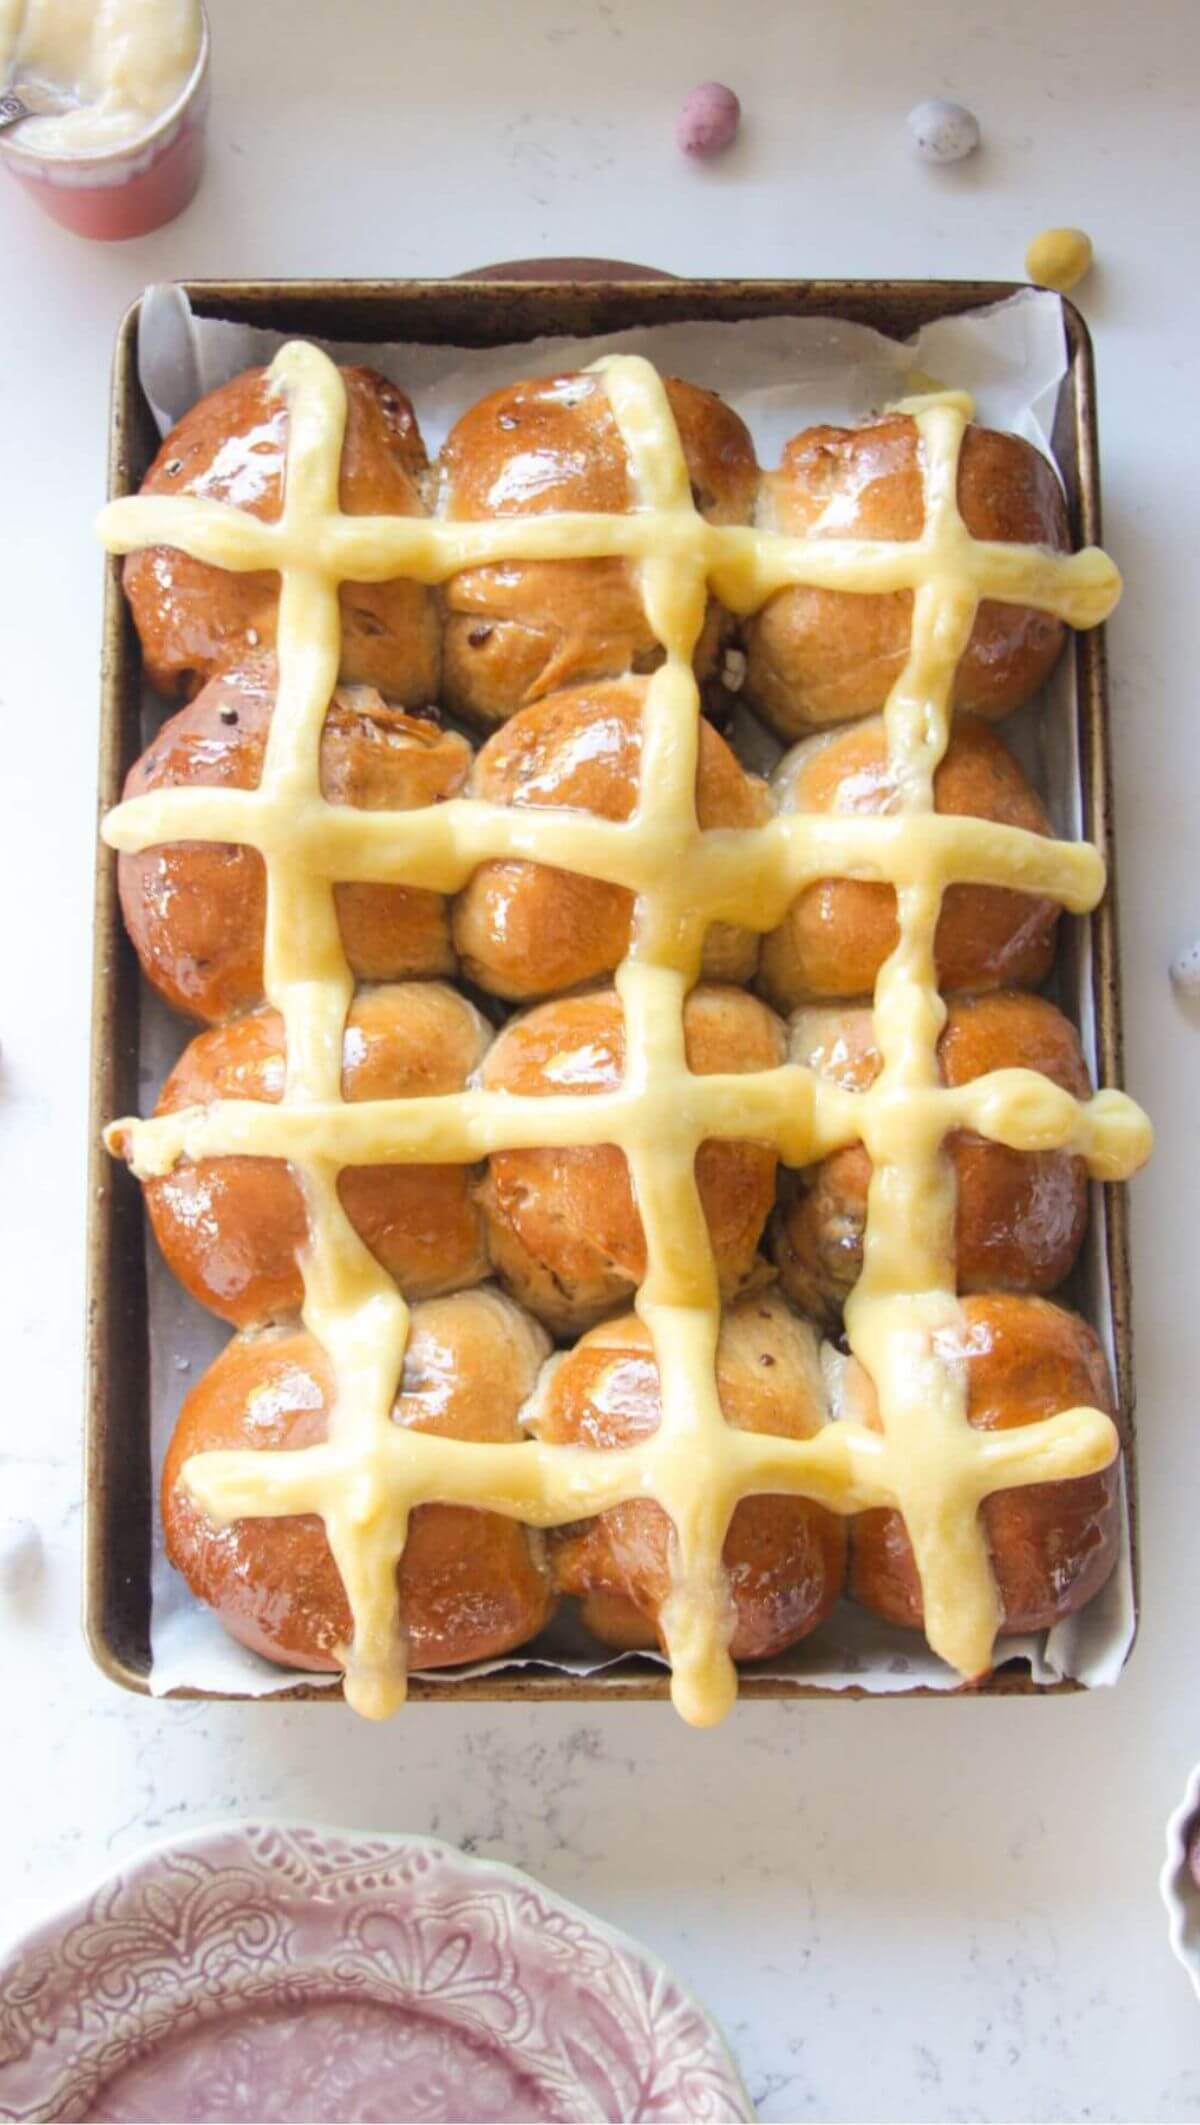 12 mini egg chocolate hot cross buns in a lined oven tray with more mini eggs on the side.